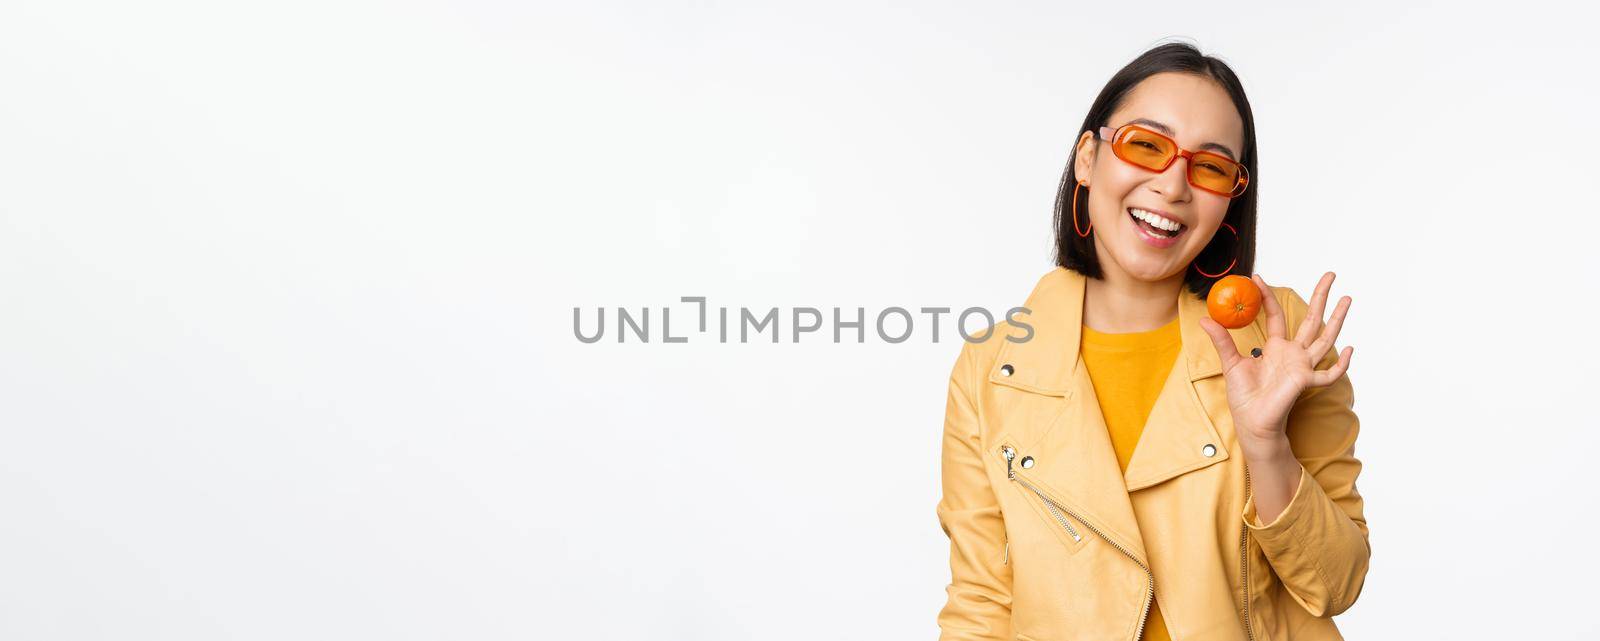 Beautiful asian girl in sunglasses showing tangerine and smiling, looking happy, posing in yellow against studio background.